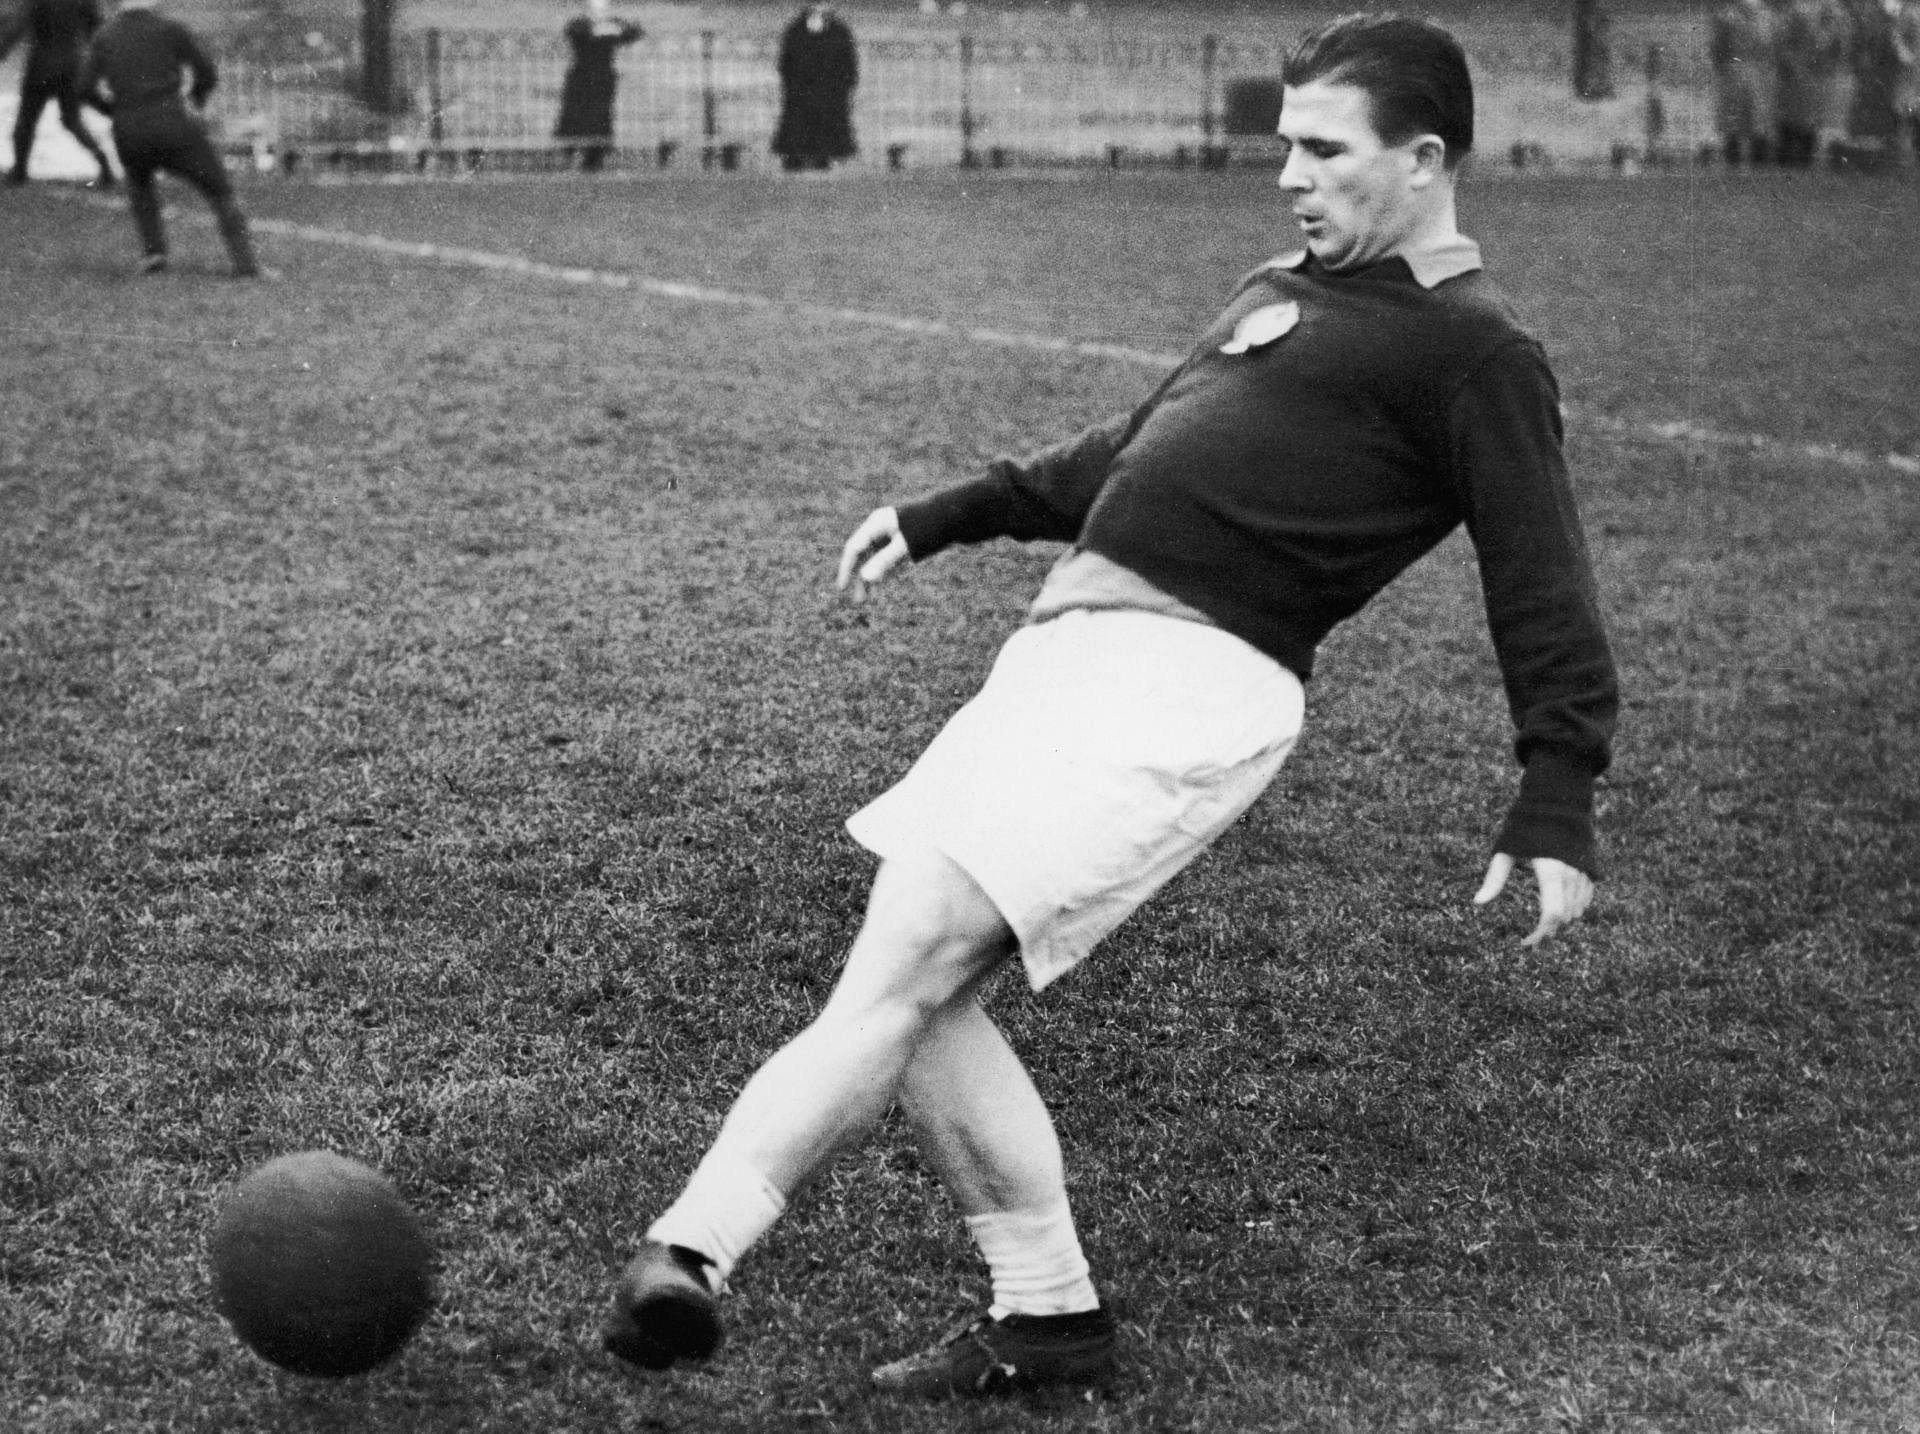 Real Madrid and Hungary legend Ferenc Puskas